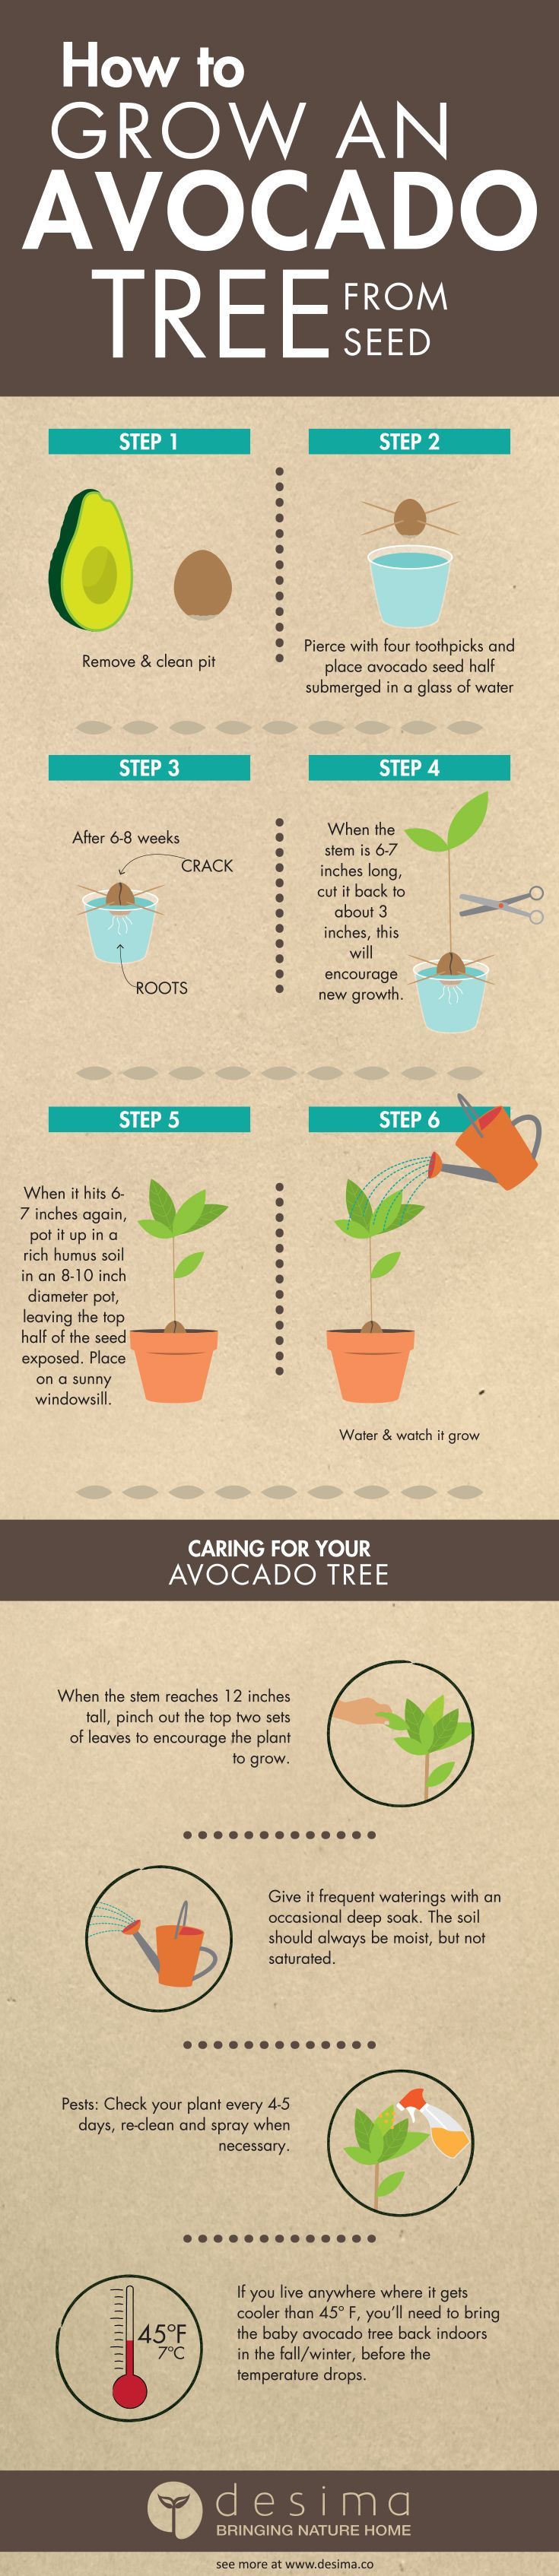 Infographic on how to grow an avocado tree from seed.